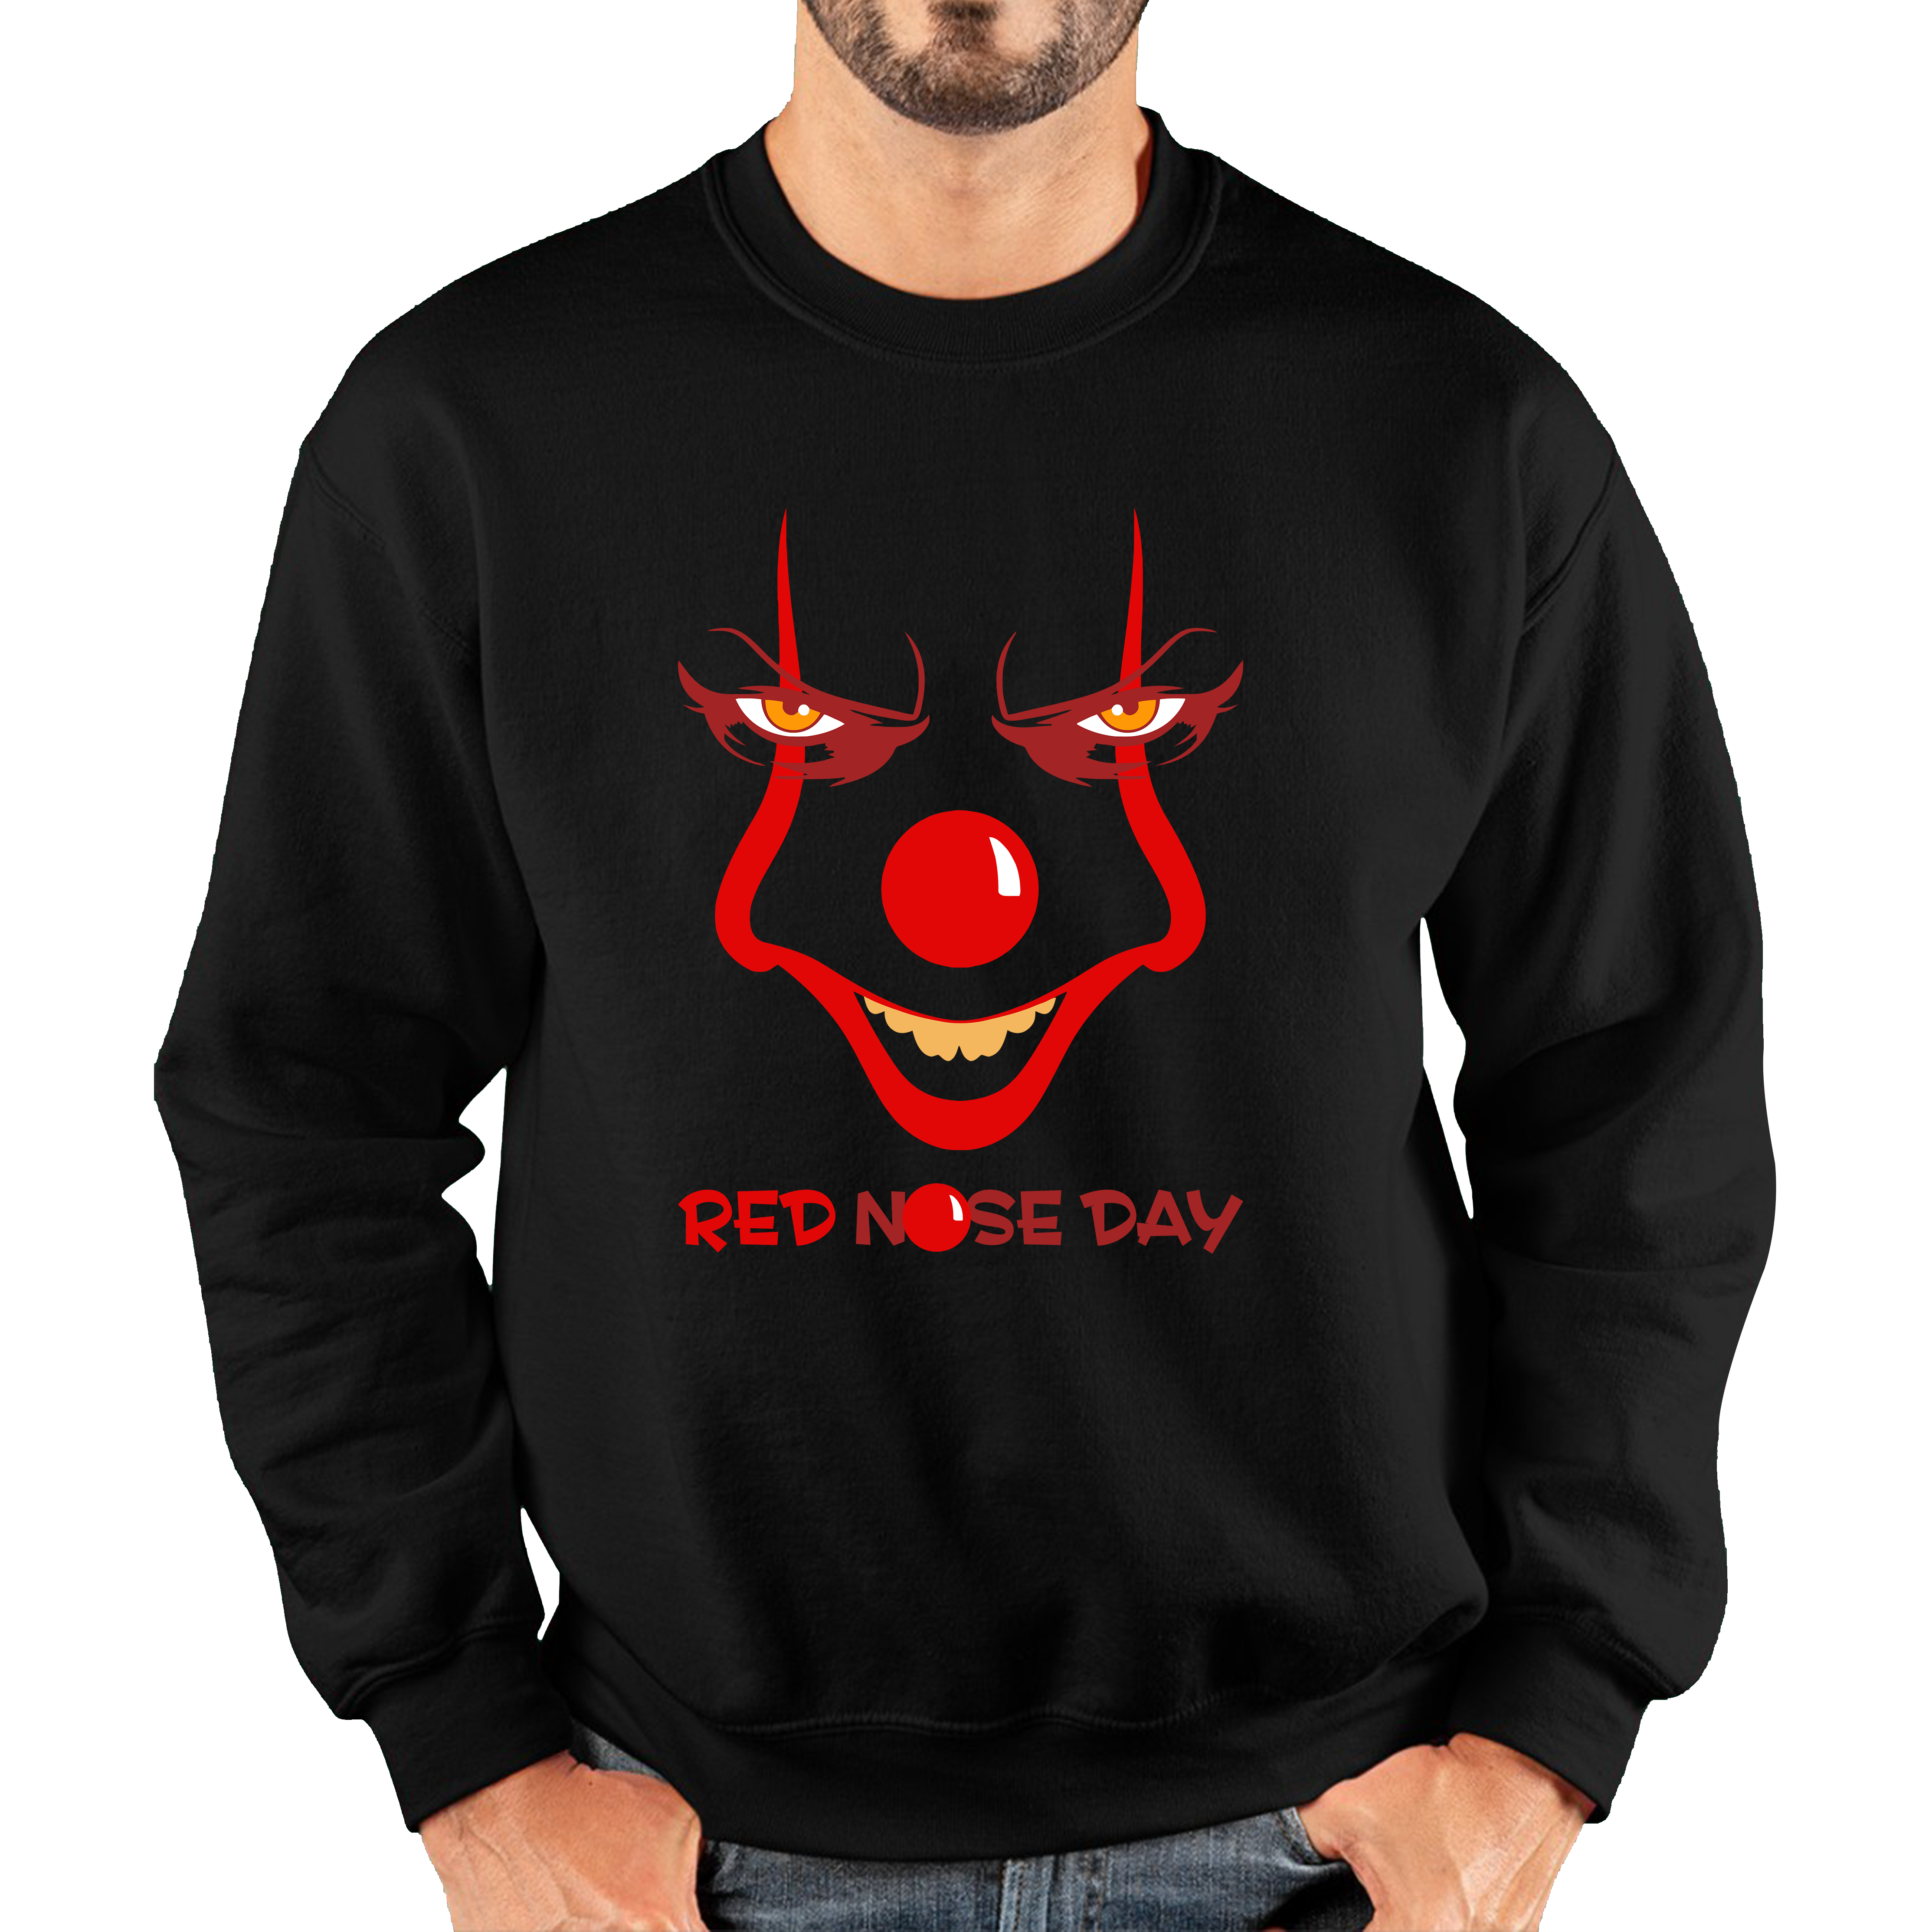 Pennywise Clown Face Red Nose Day Funny Comic Relief Adult Sweatshirt. 50% Goes To Charity